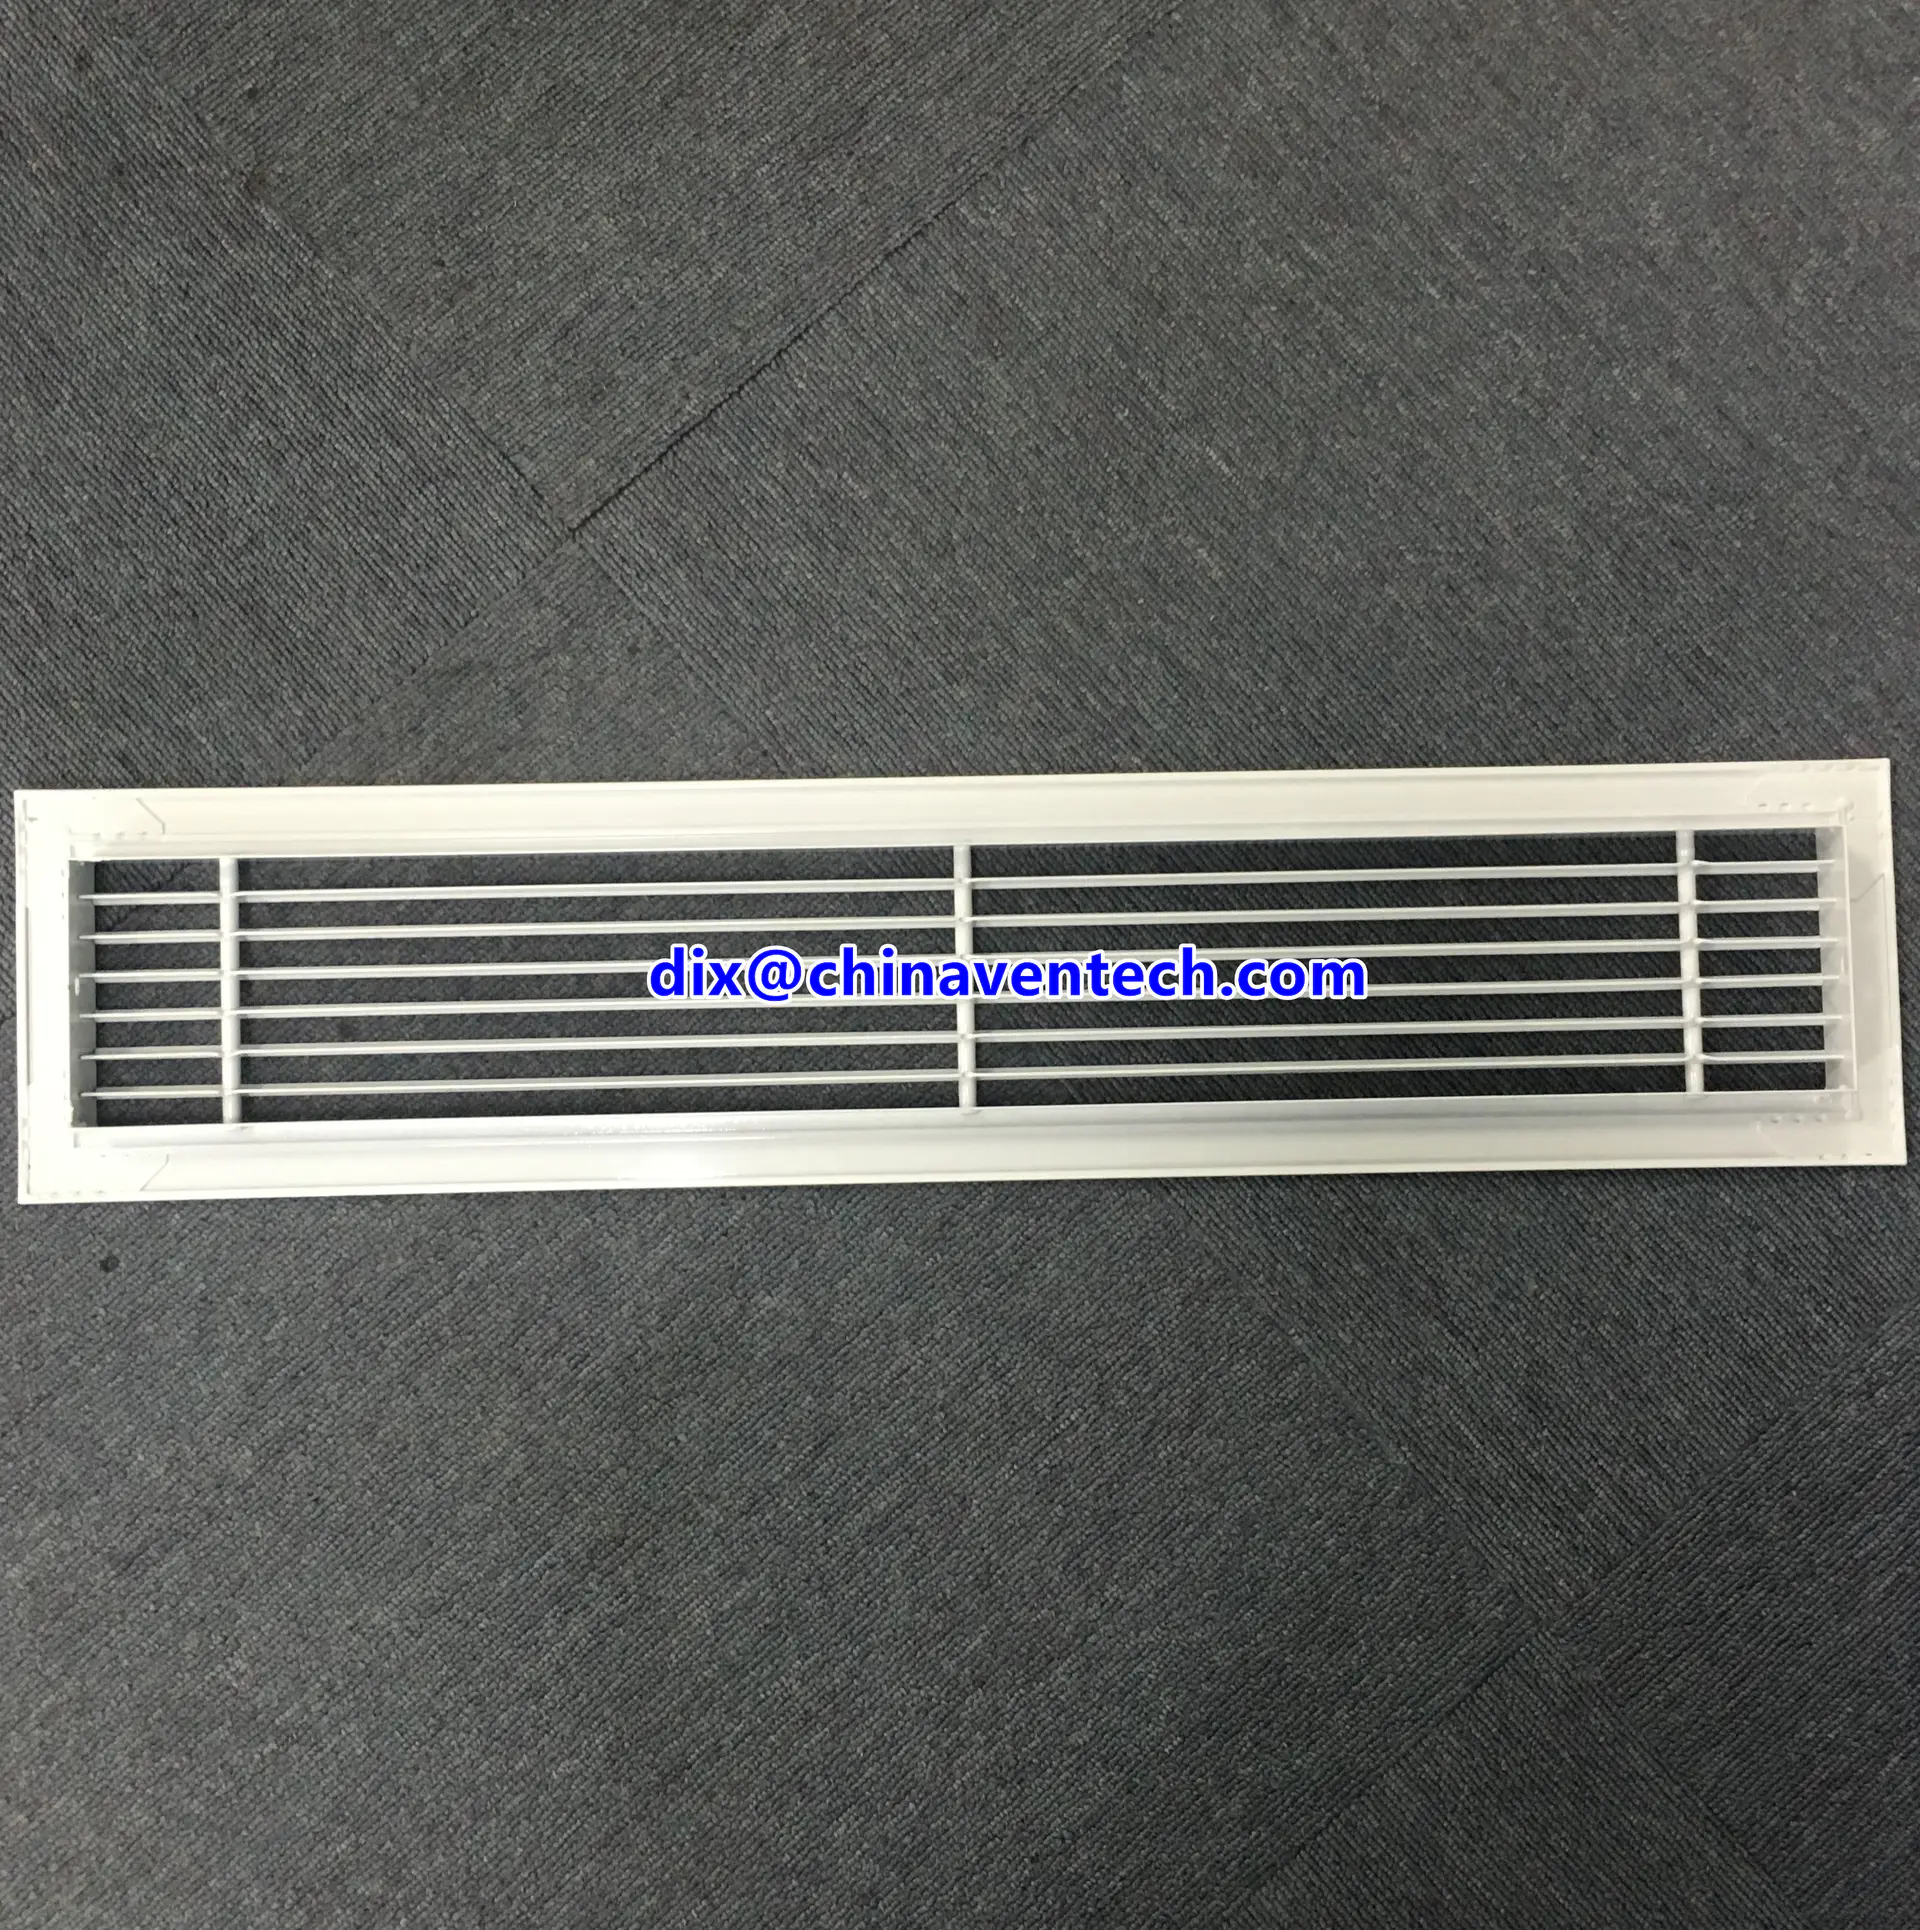 HVAC linear slot diffuser air vent return air flat bar grille for ventilaiton system used